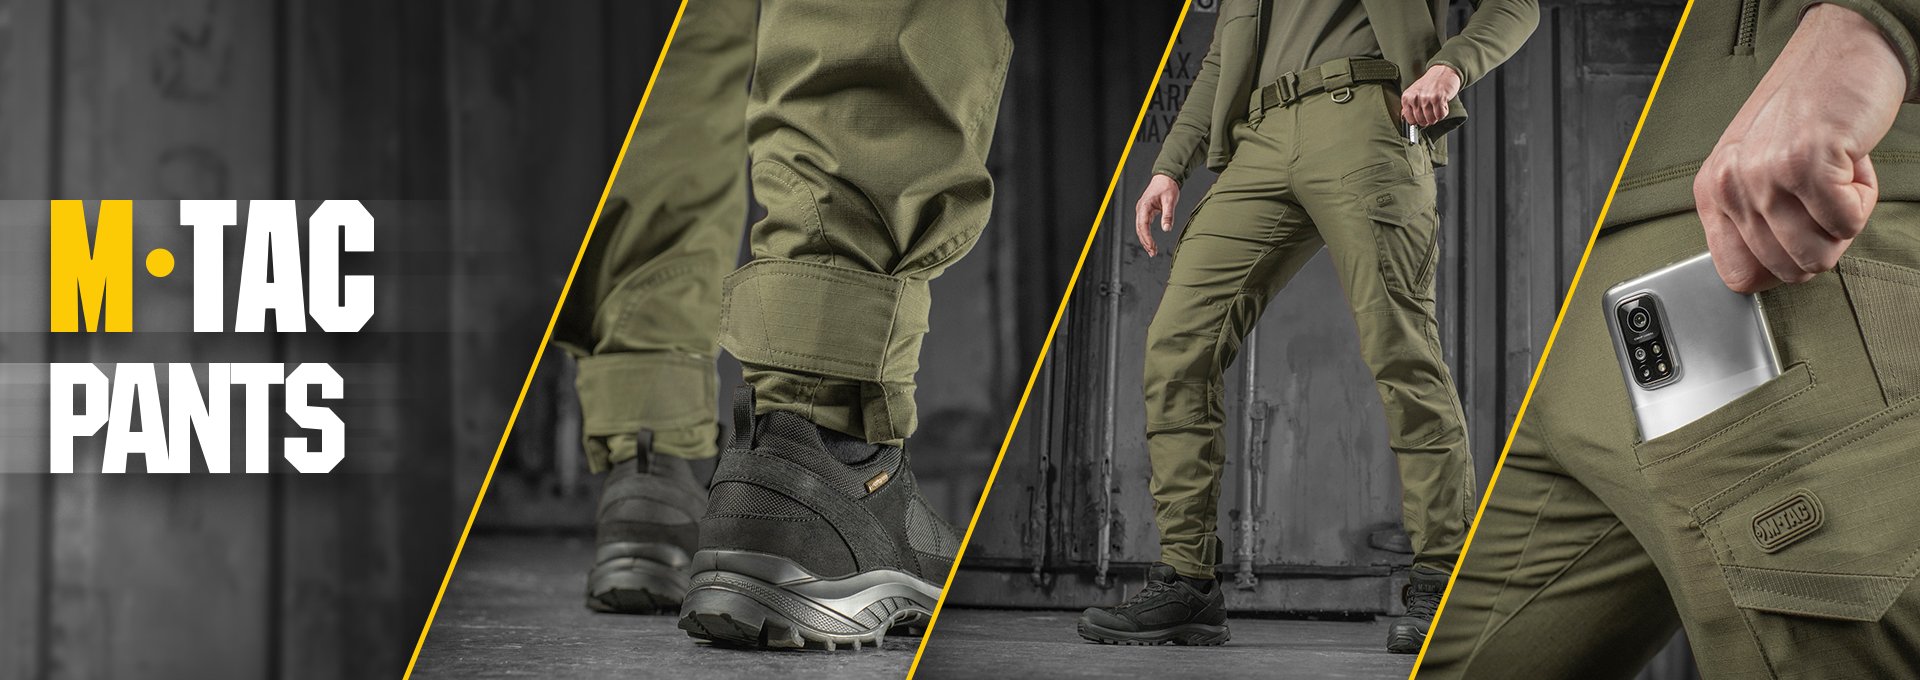 Military Tactical Pants Uniform Combat pants with Knee Pads Camouflage Suit  Army Military CS Shooting Hunting Clothes - AliExpress